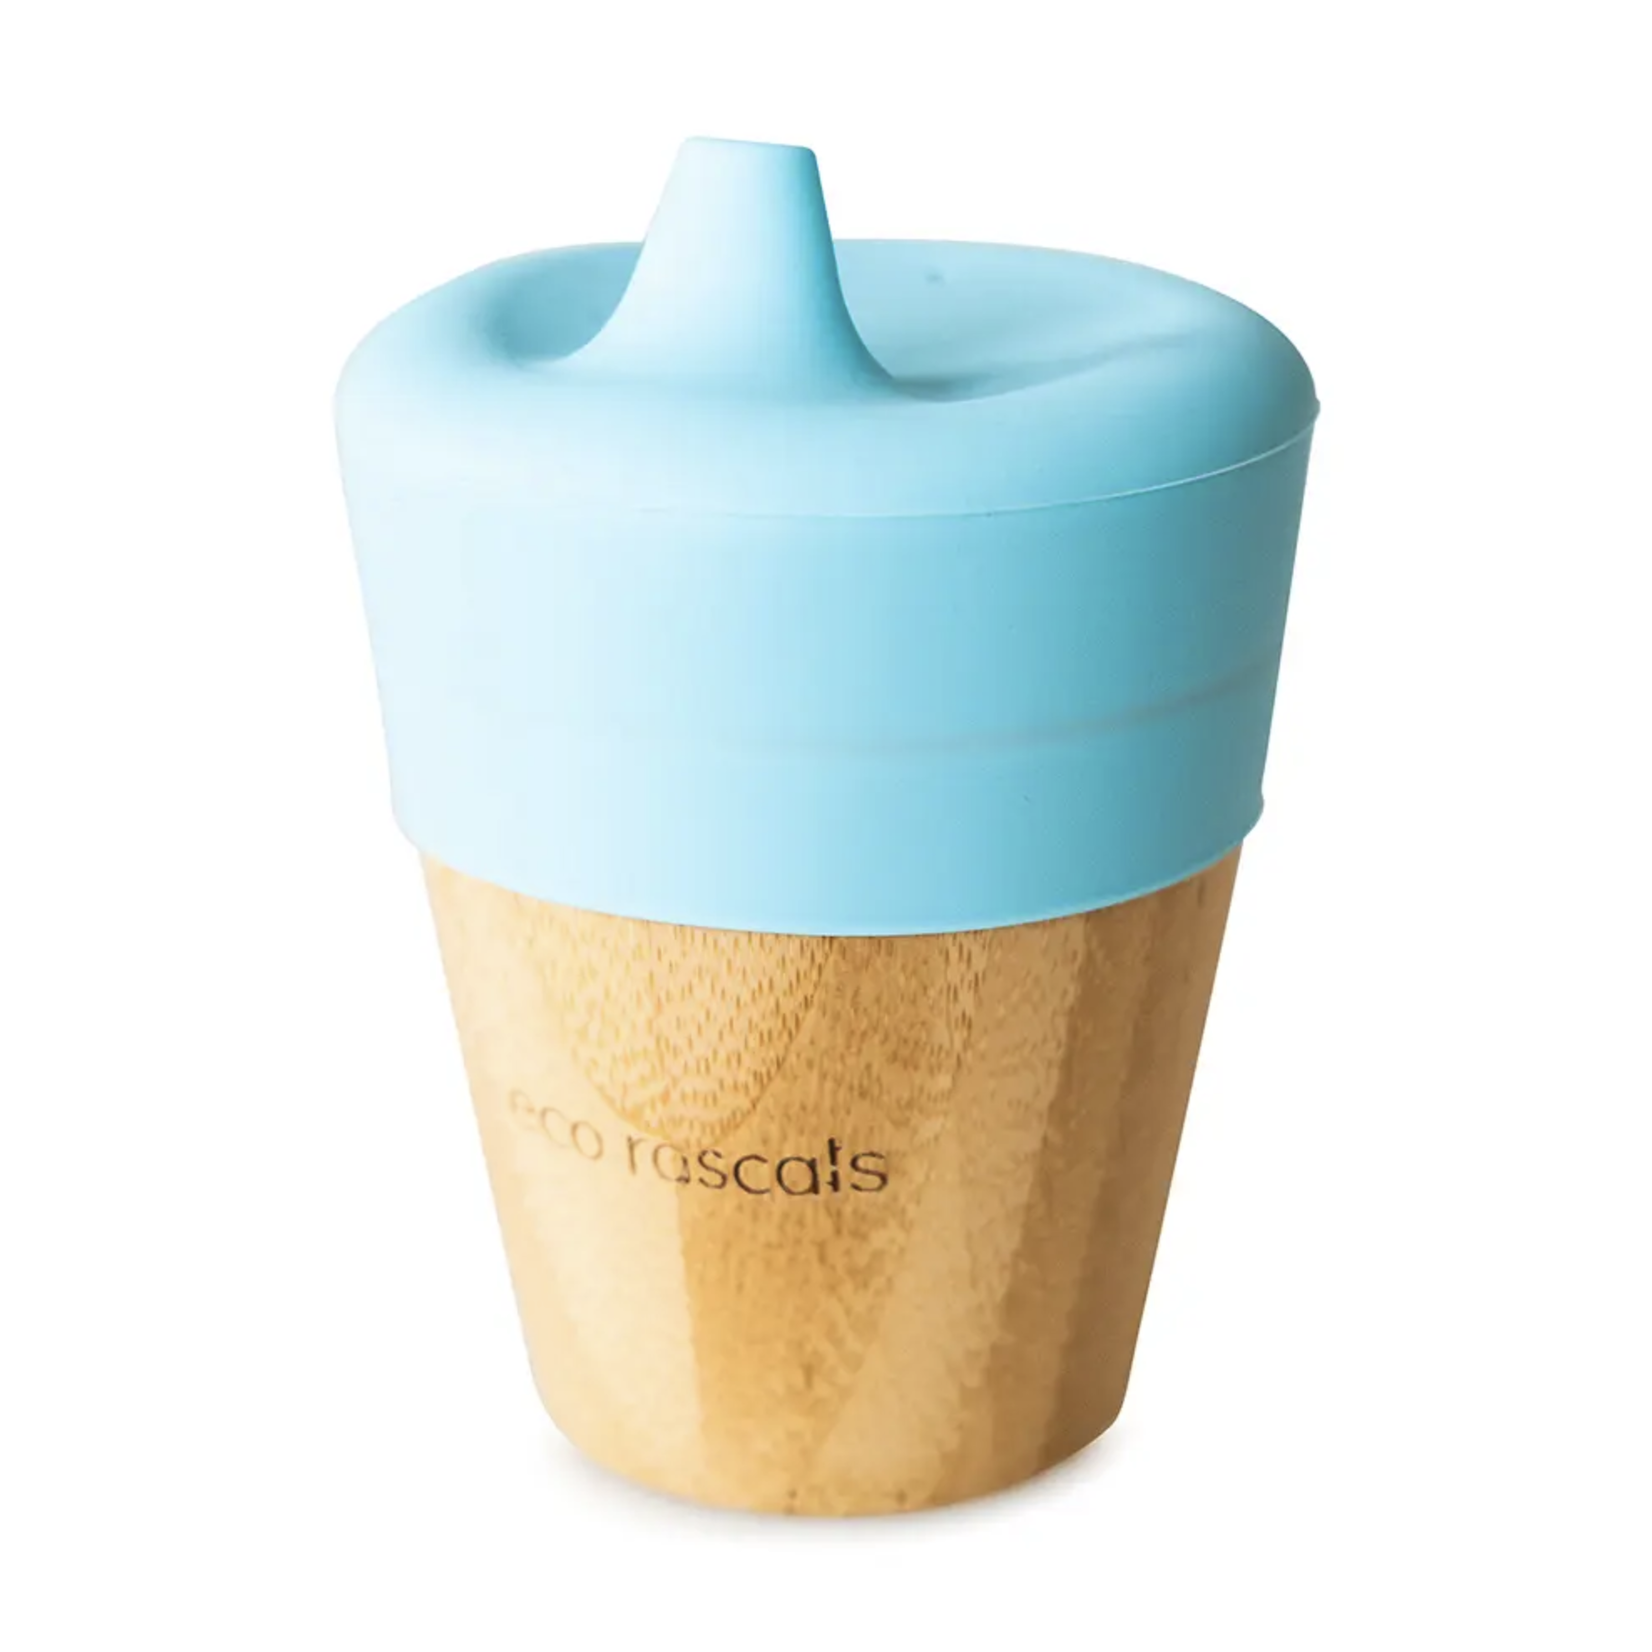 Eco Rascals Small Cup-Blue